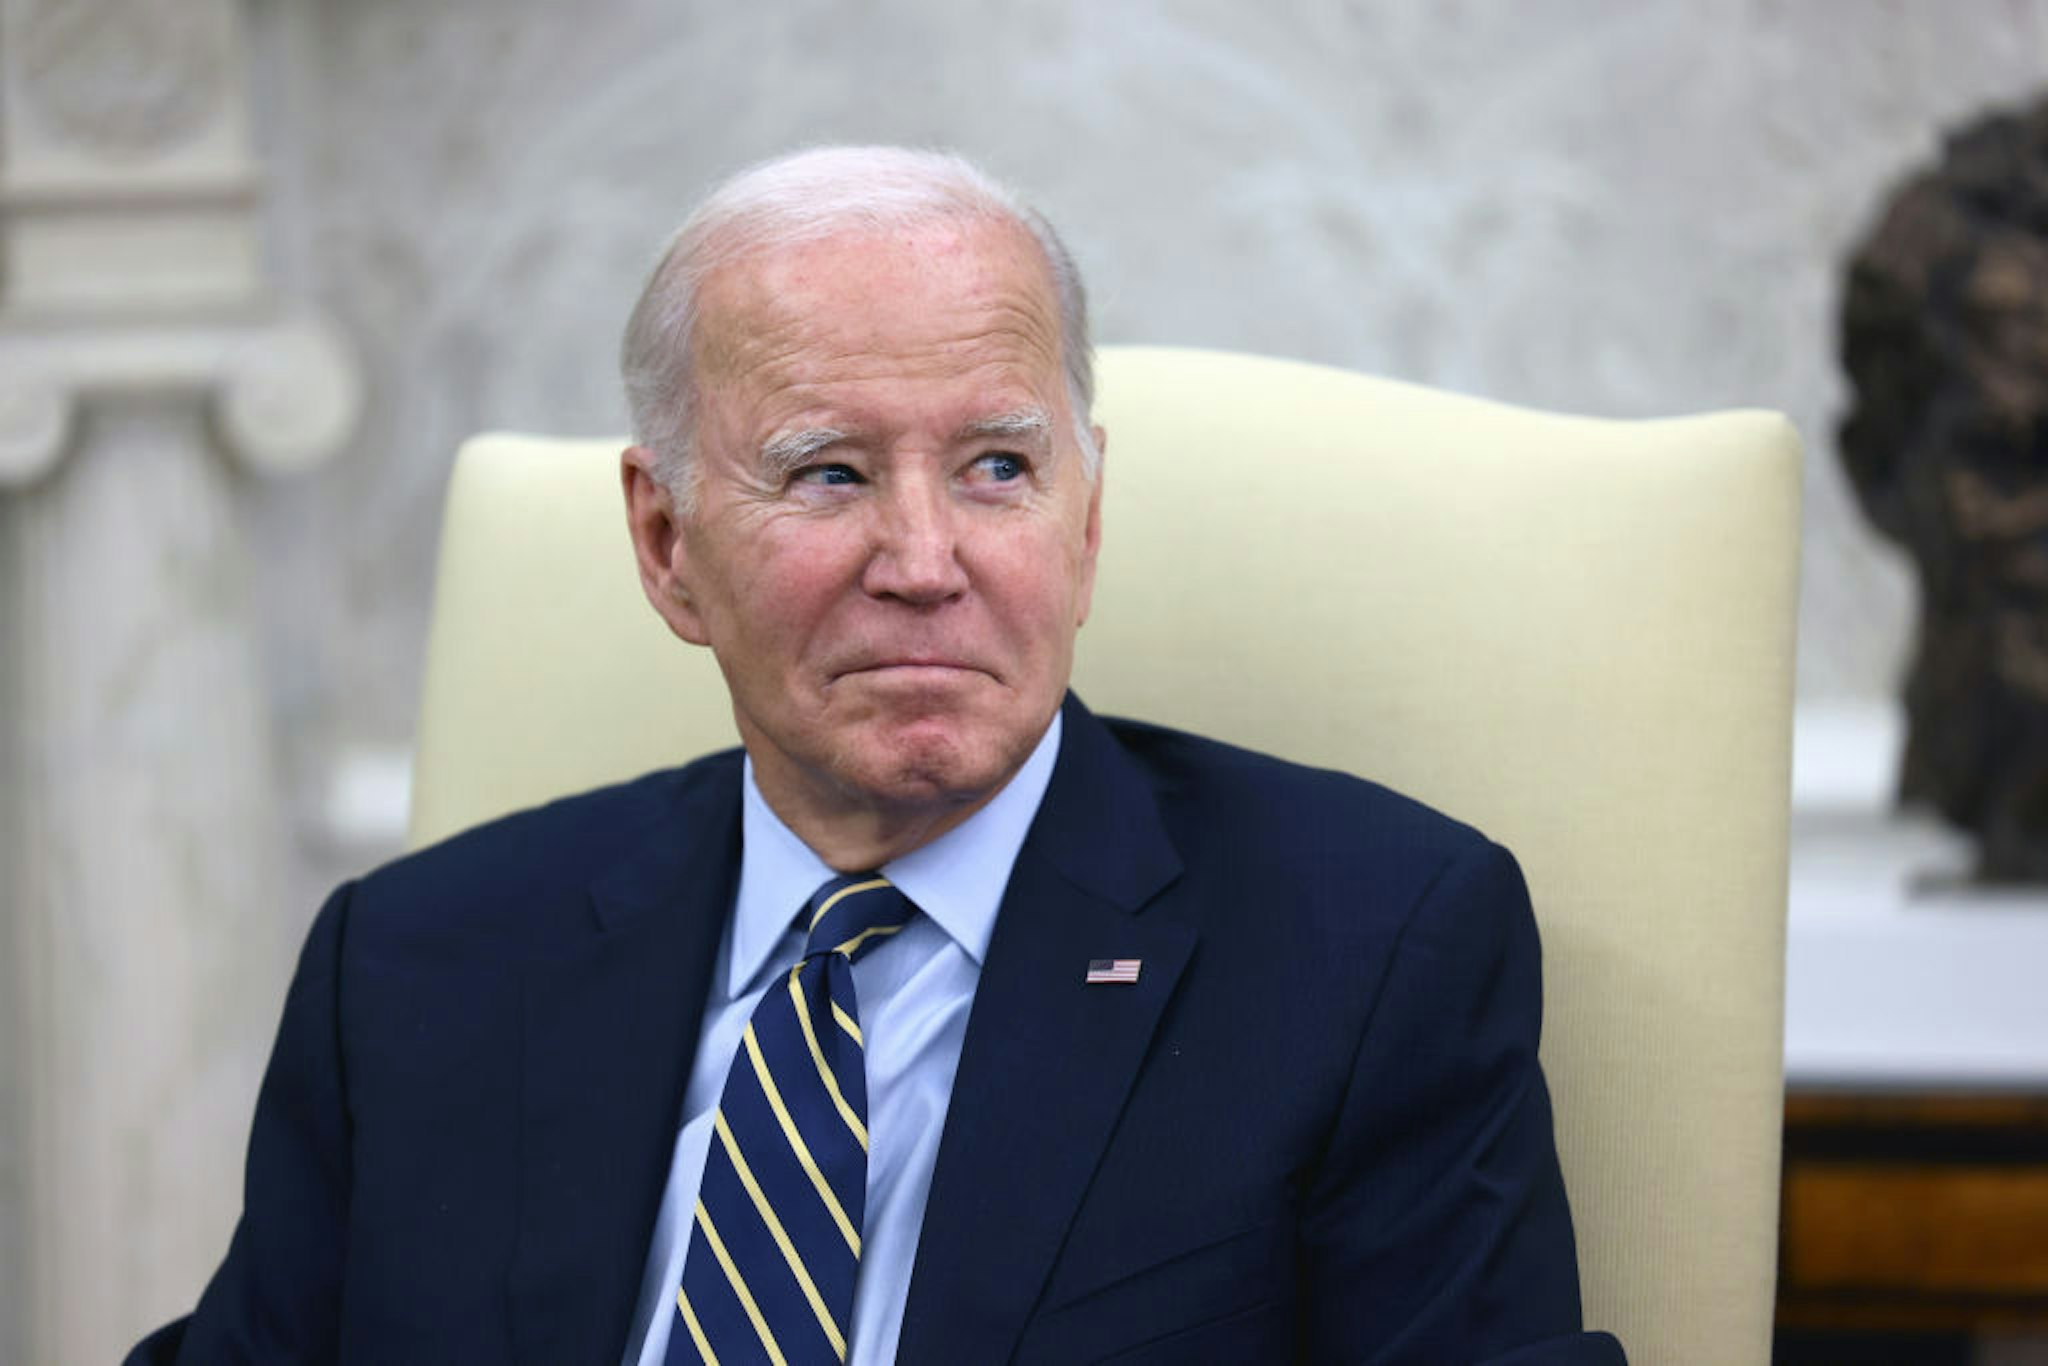 US President Joe Biden during a meeting with Volodymyr Zelenskiy, Ukraine's president, not pictured, in the Oval Office of the White House in Washington, DC, US, on Thursday, Sept. 21, 2023. Zelenskiy pressed US lawmakers privately for sustained support to counter Russia's war machine in a conflict that allies now fear will drag on for years, just as hardline Republicans are threatening to halt additional aid. Photographer: Julia Nikhinson/CNP/Bloomberg via Getty Images